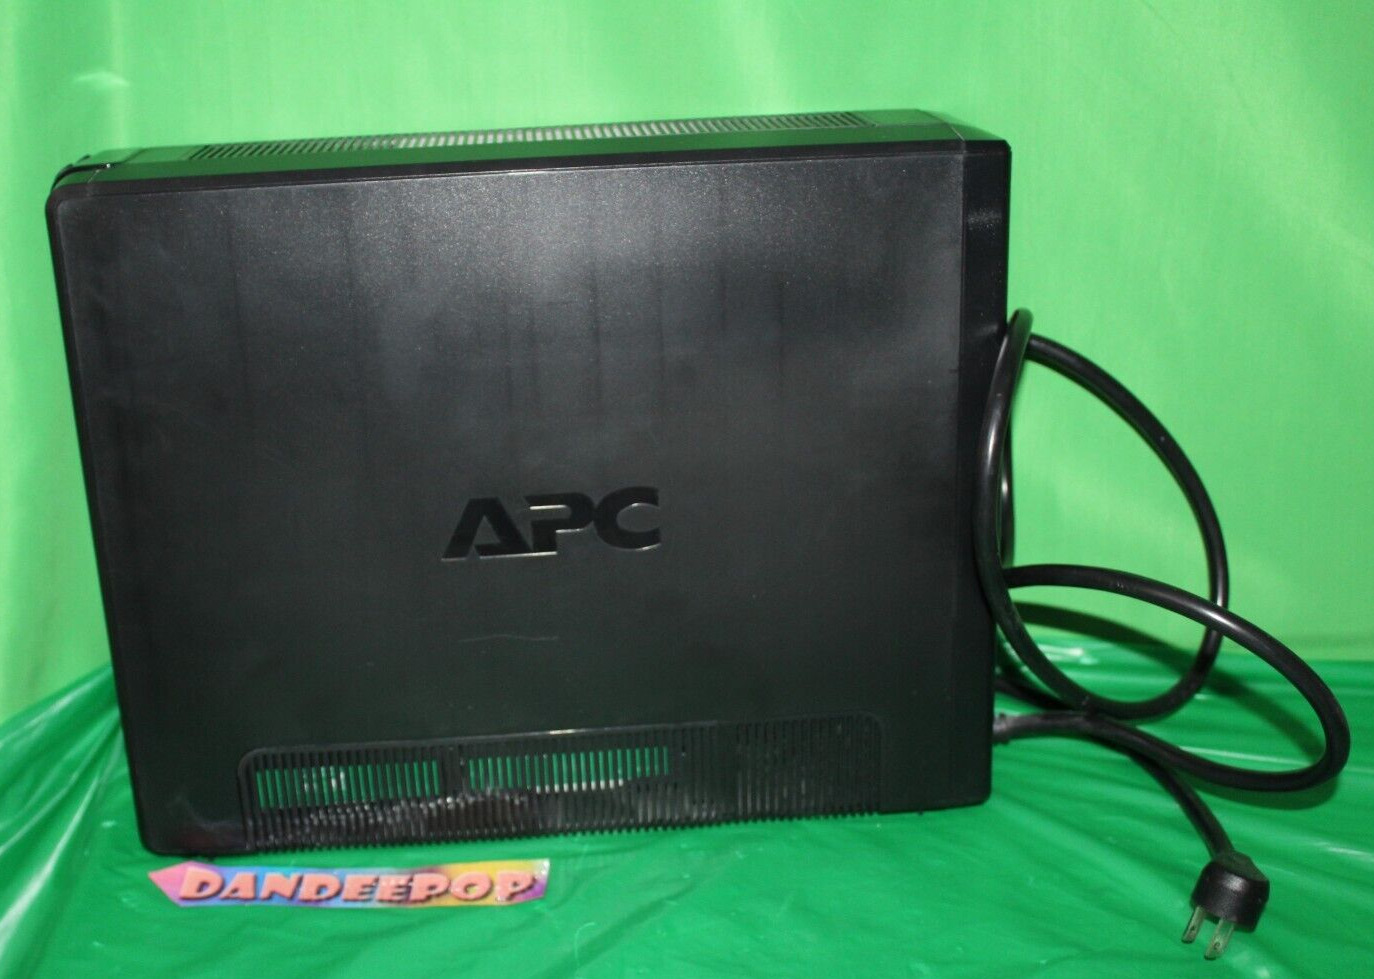 APC Backups Power Supply Surge Protector BR1500G Complete 10 Outlet